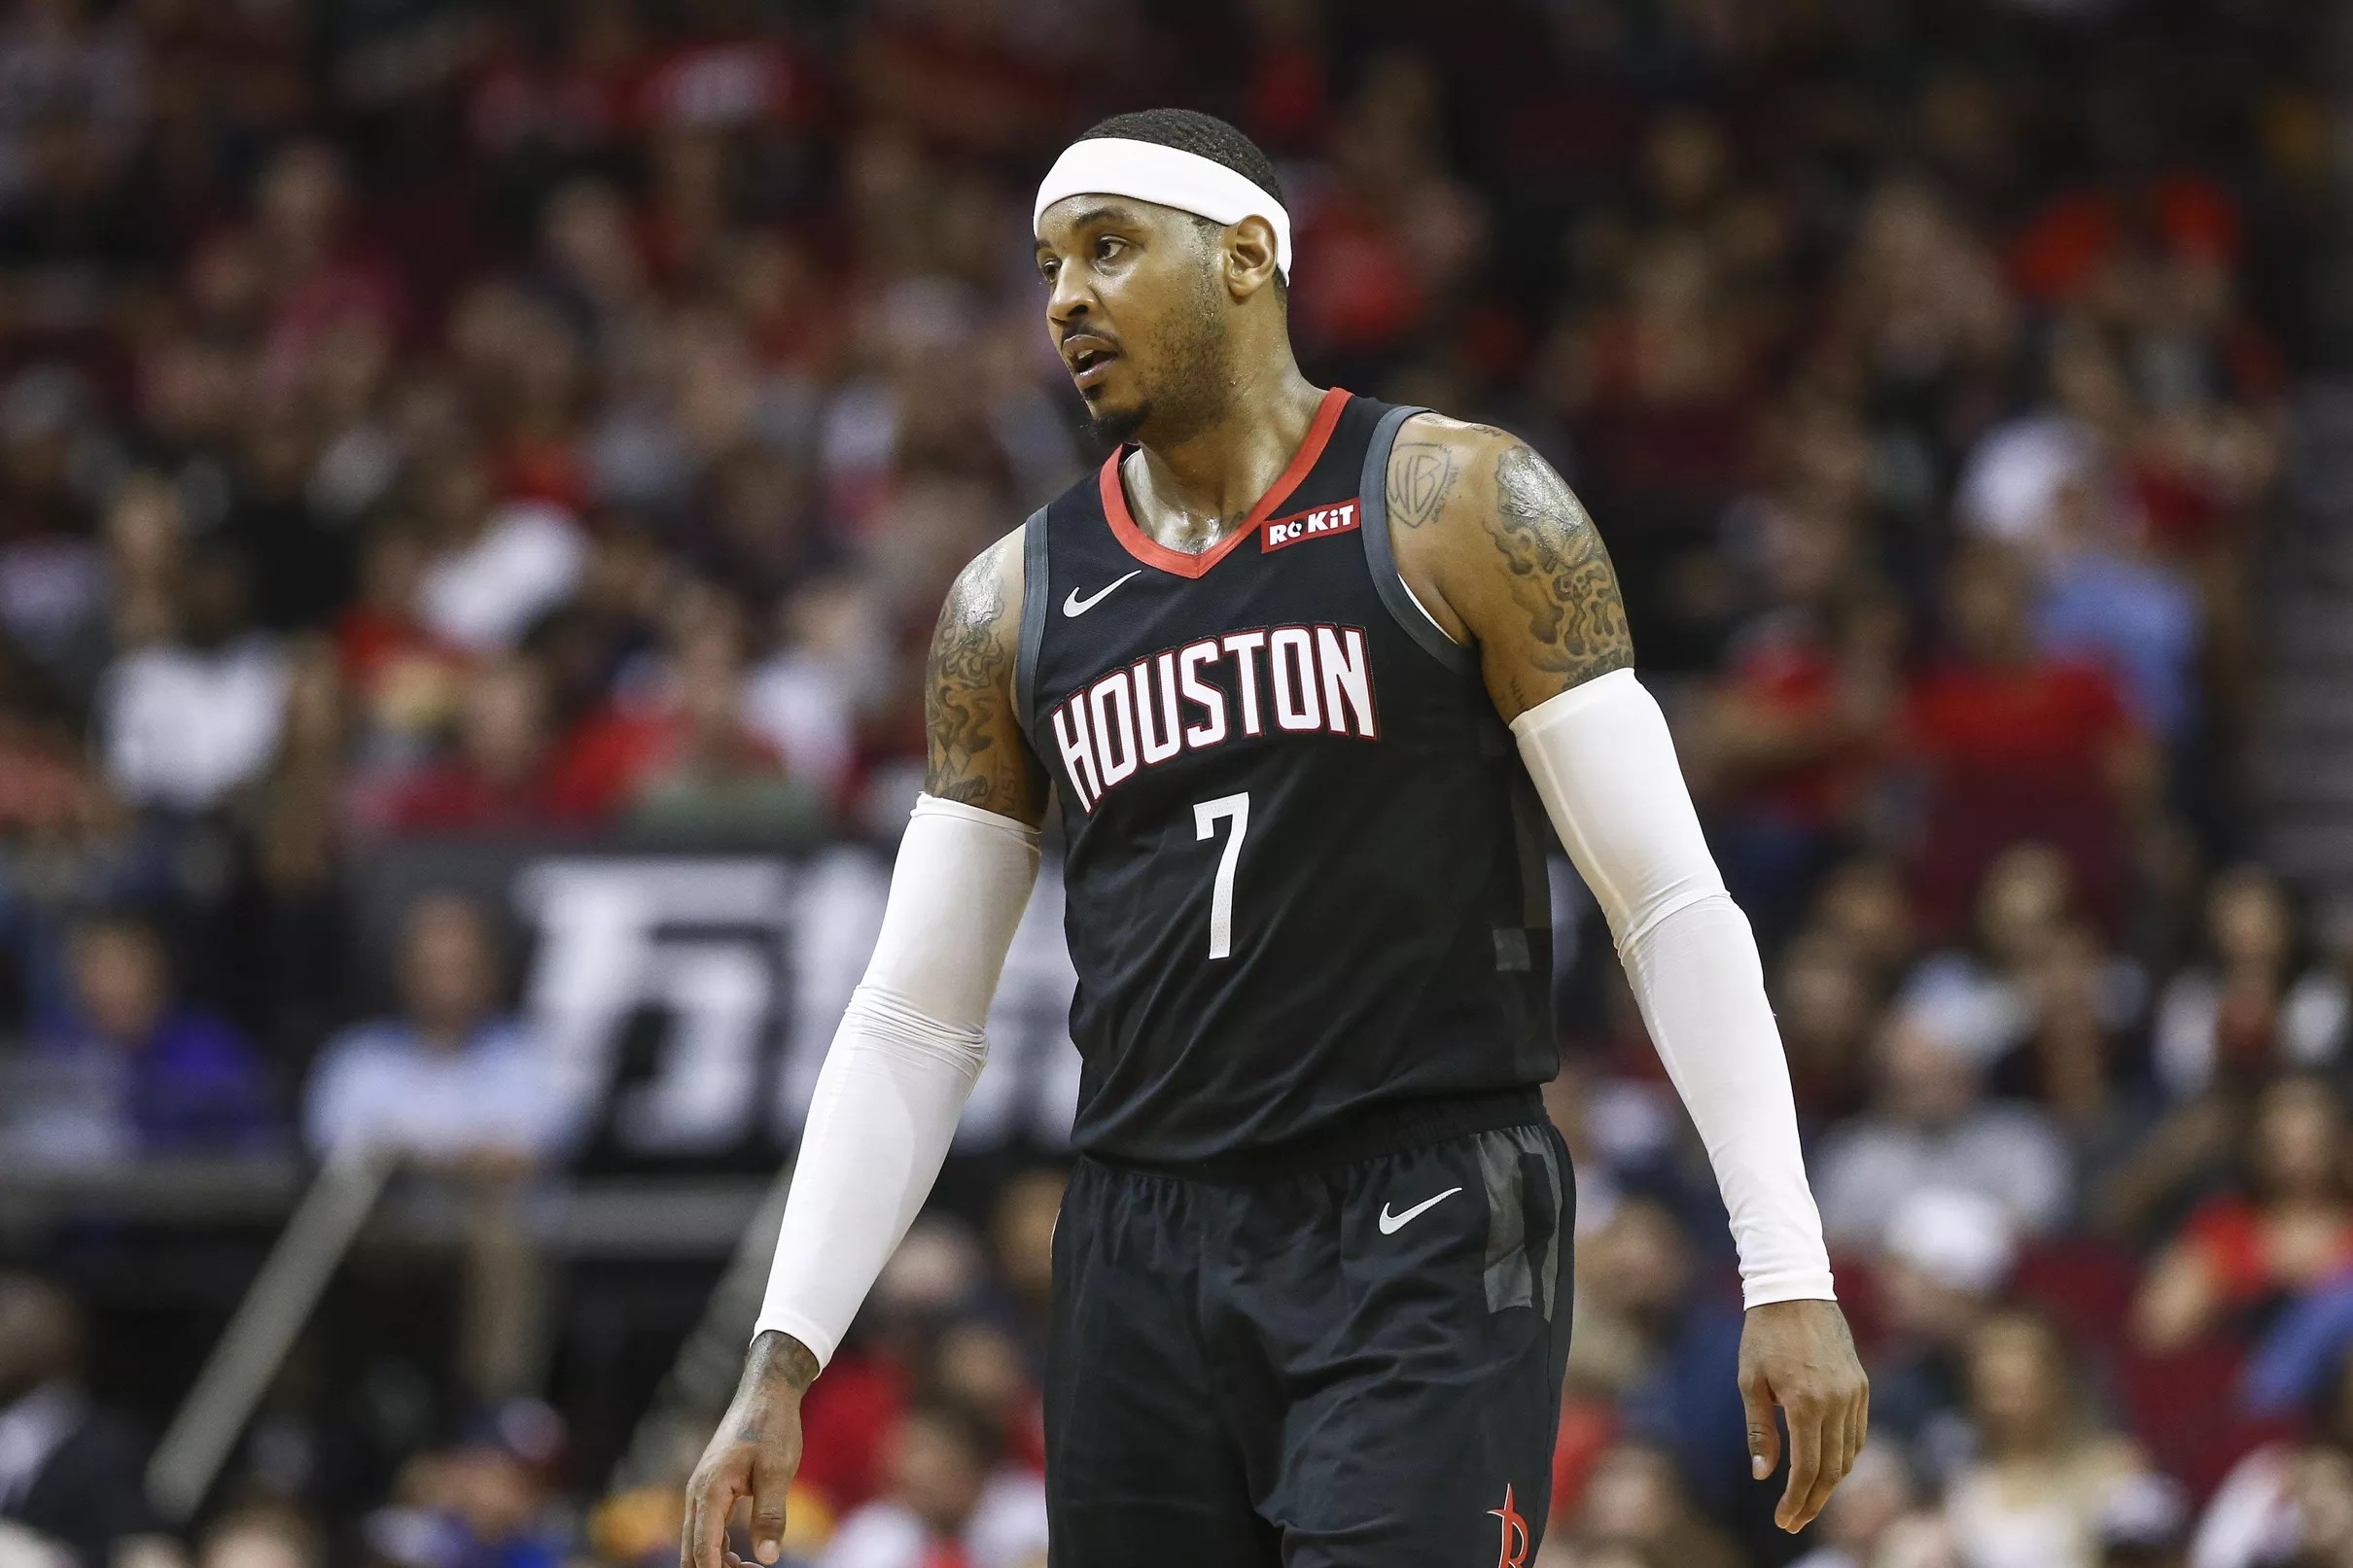 Ringer Says Blazers, Carmelo Would Be a Nice Match